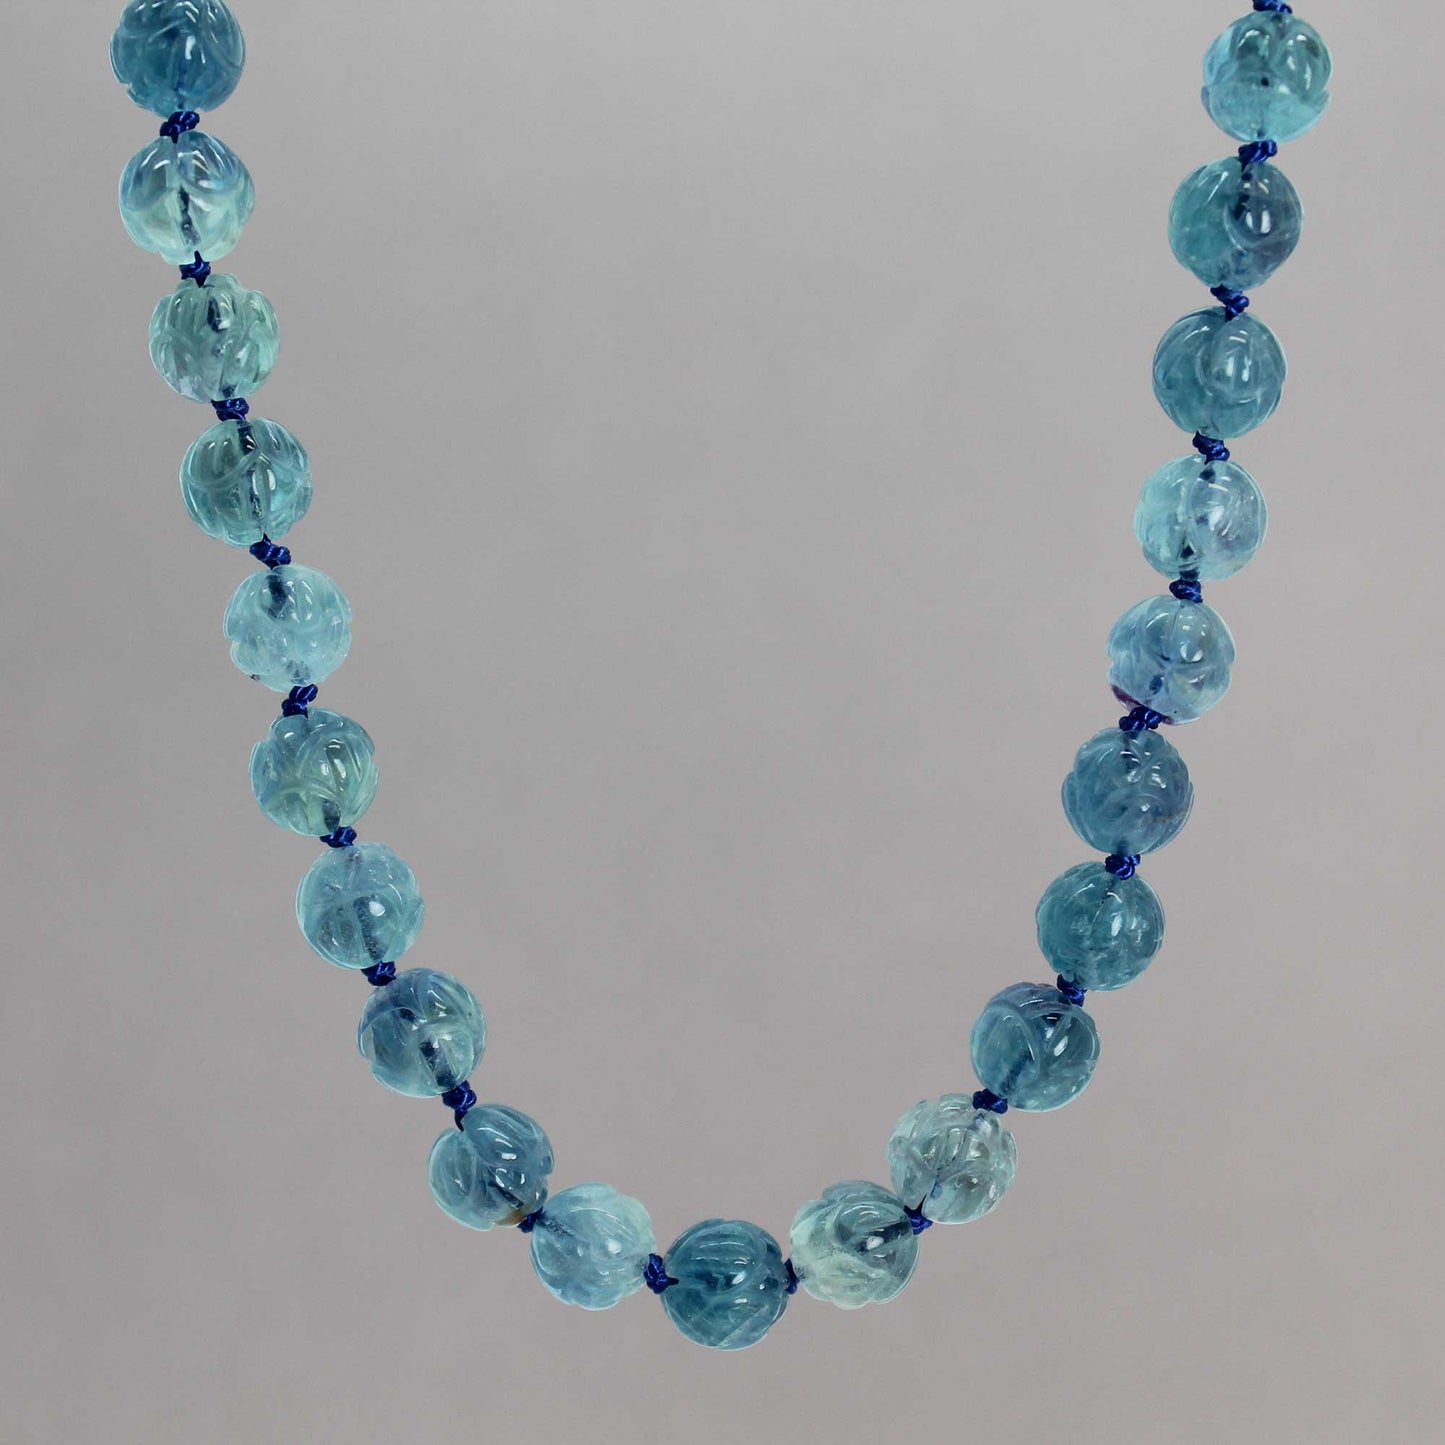 Hand Knotted Fluorite Bead Necklace, 28 Inch Endless Strand